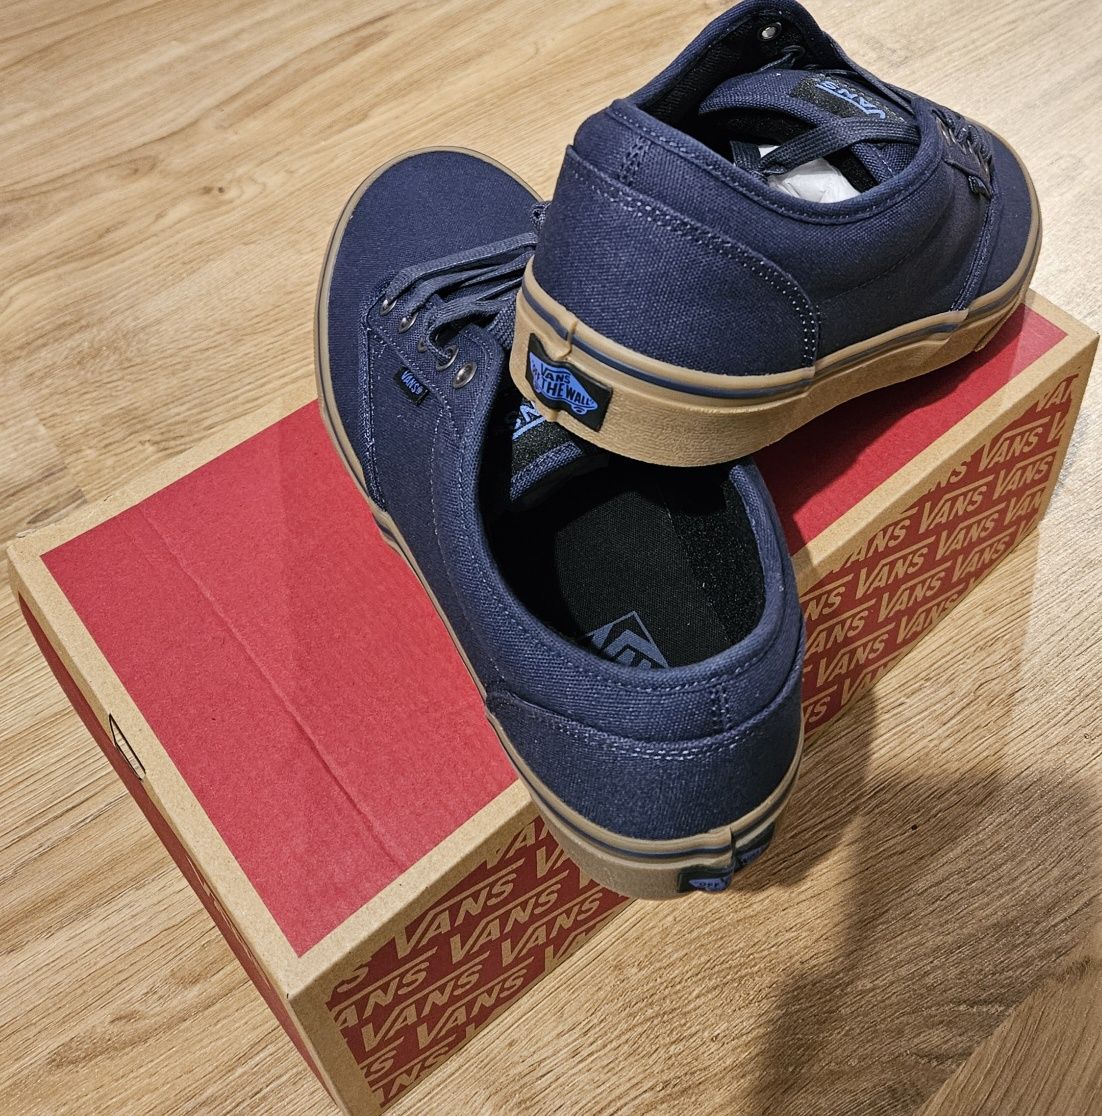 Buty sneakersy Vans atwood navy 45